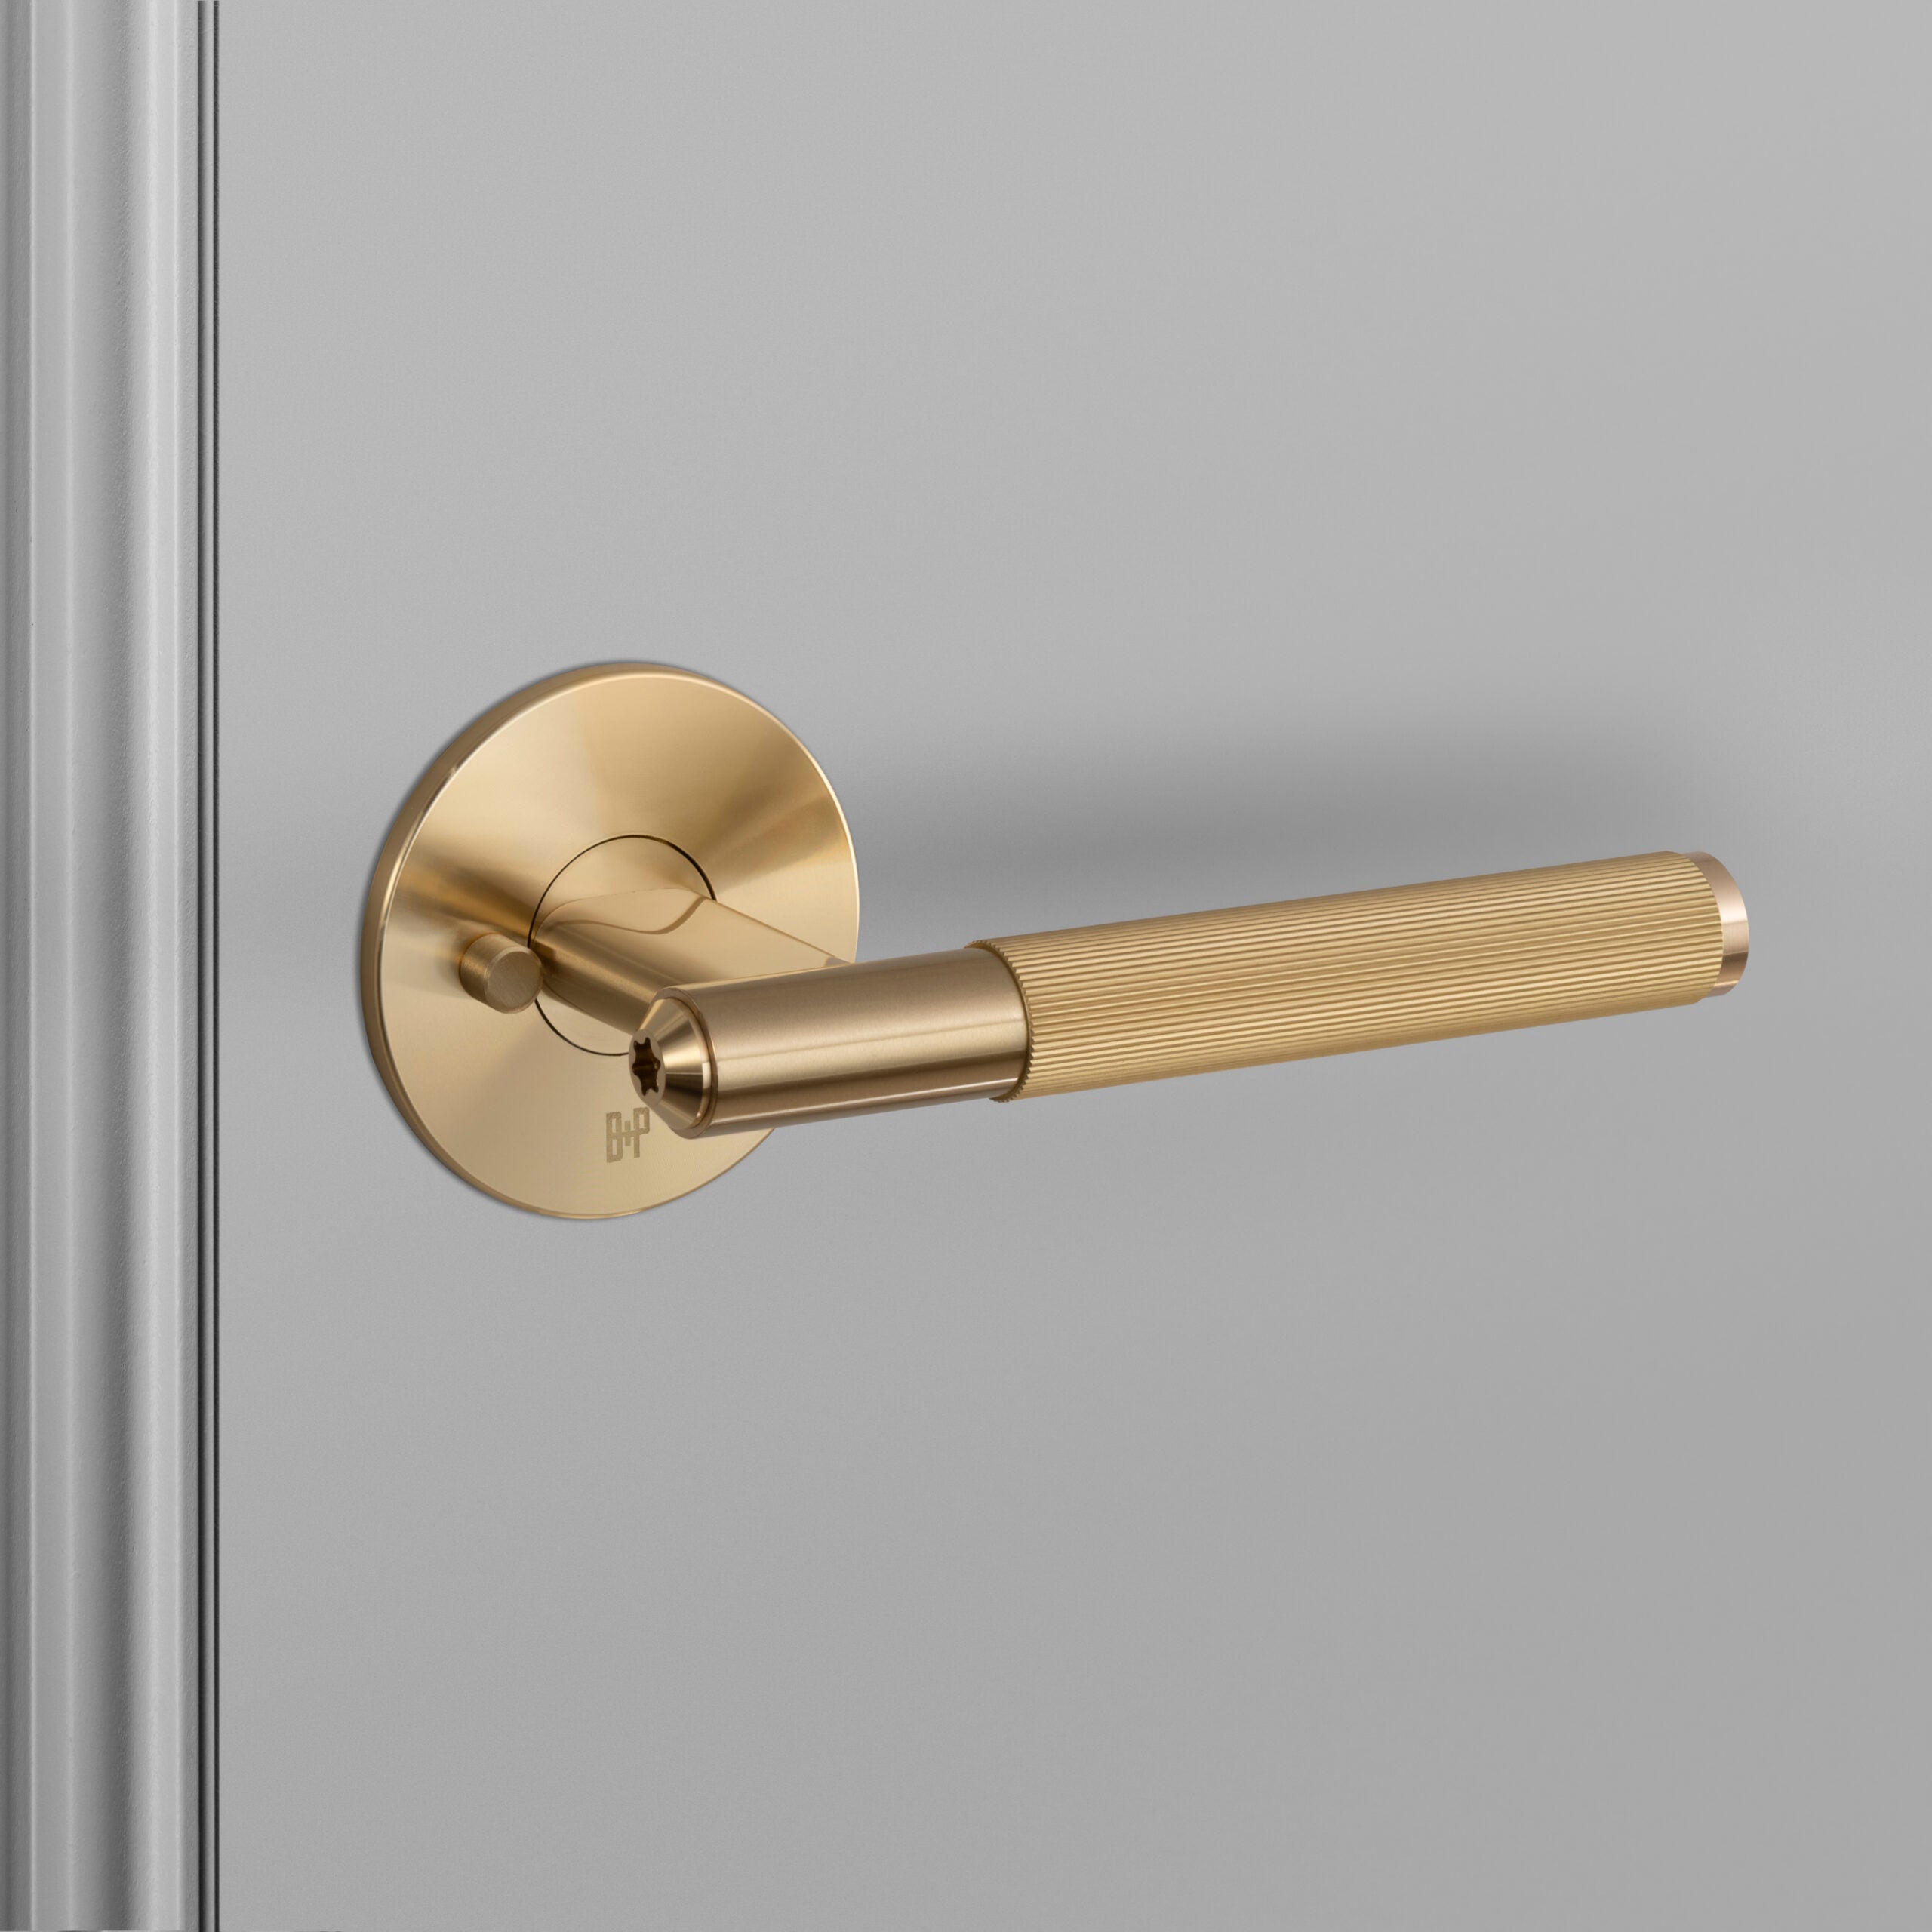 Buster + Punch Conventional Door Handle, Cross Design - PRIVACY TYPE Hardware Buster + Punch Brass  